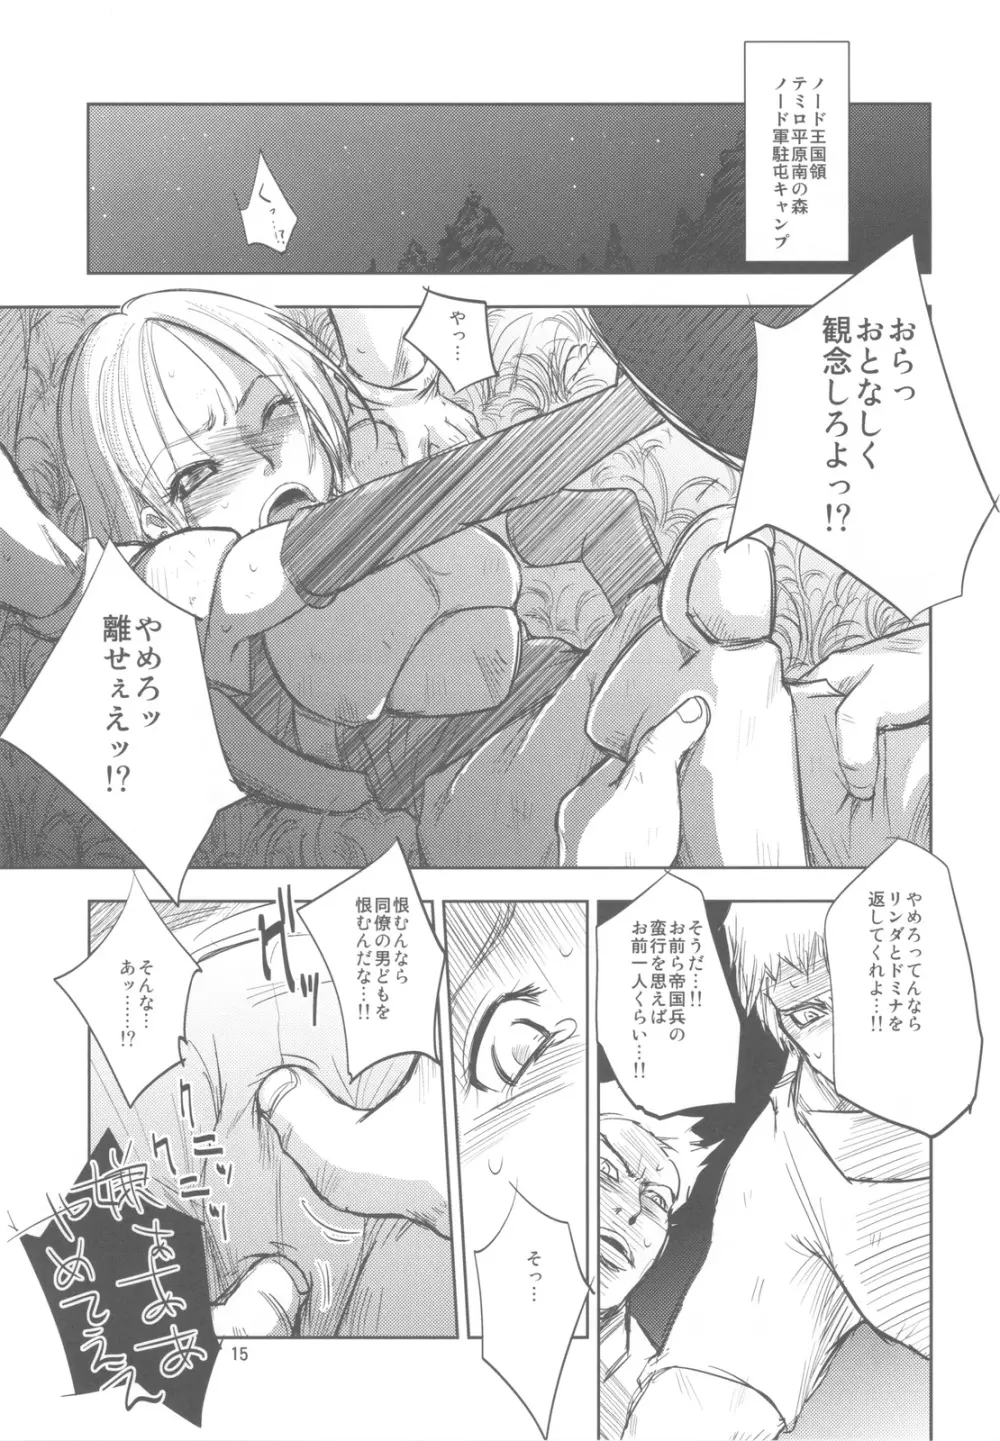 GRASSEN'S WAR ANOTHER STORY Ex #01 ノード侵攻 I - page14